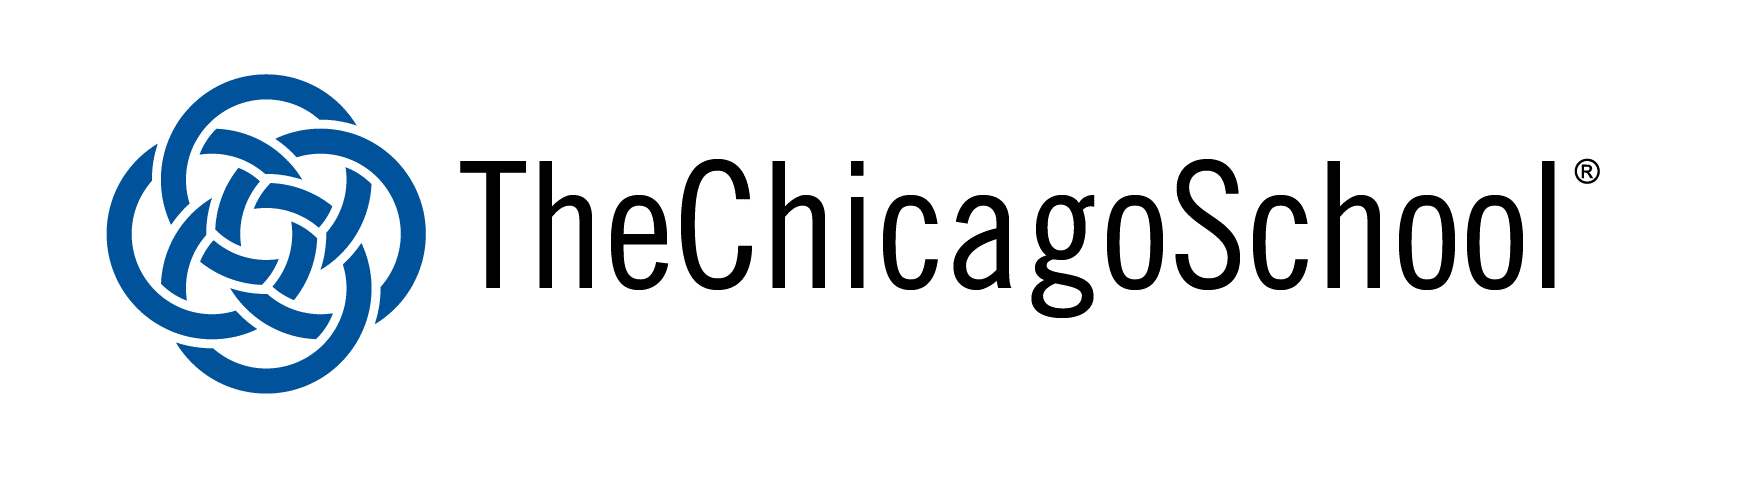 M.S. in Applied Behavior Analysis Program at The Chicago School of Professional Psychology